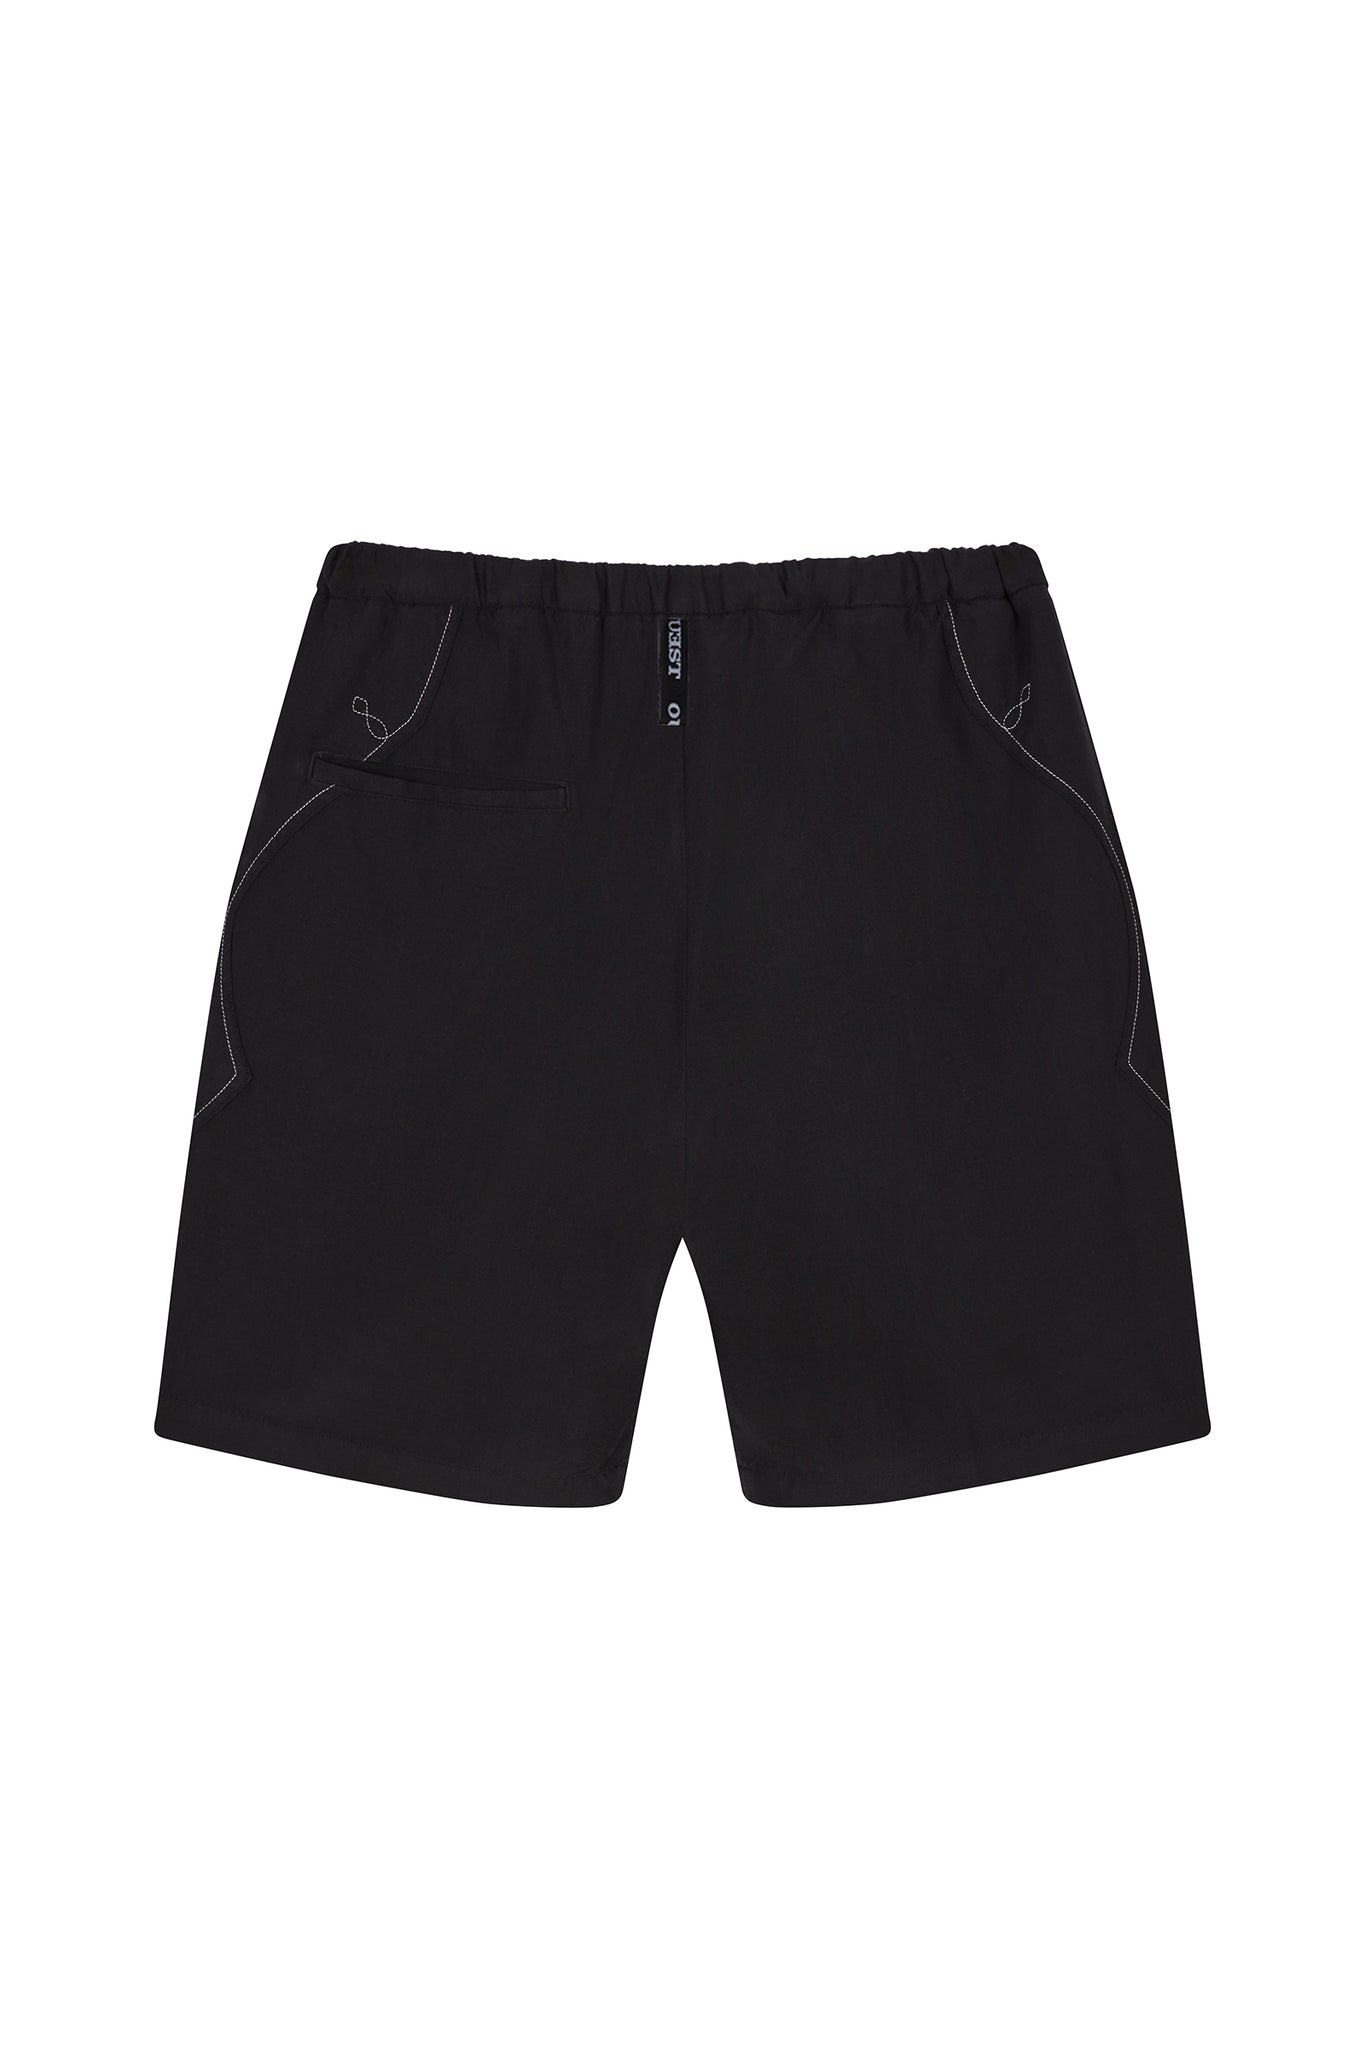 THE WESTERN CLIMBING SHORTS IN BLACK